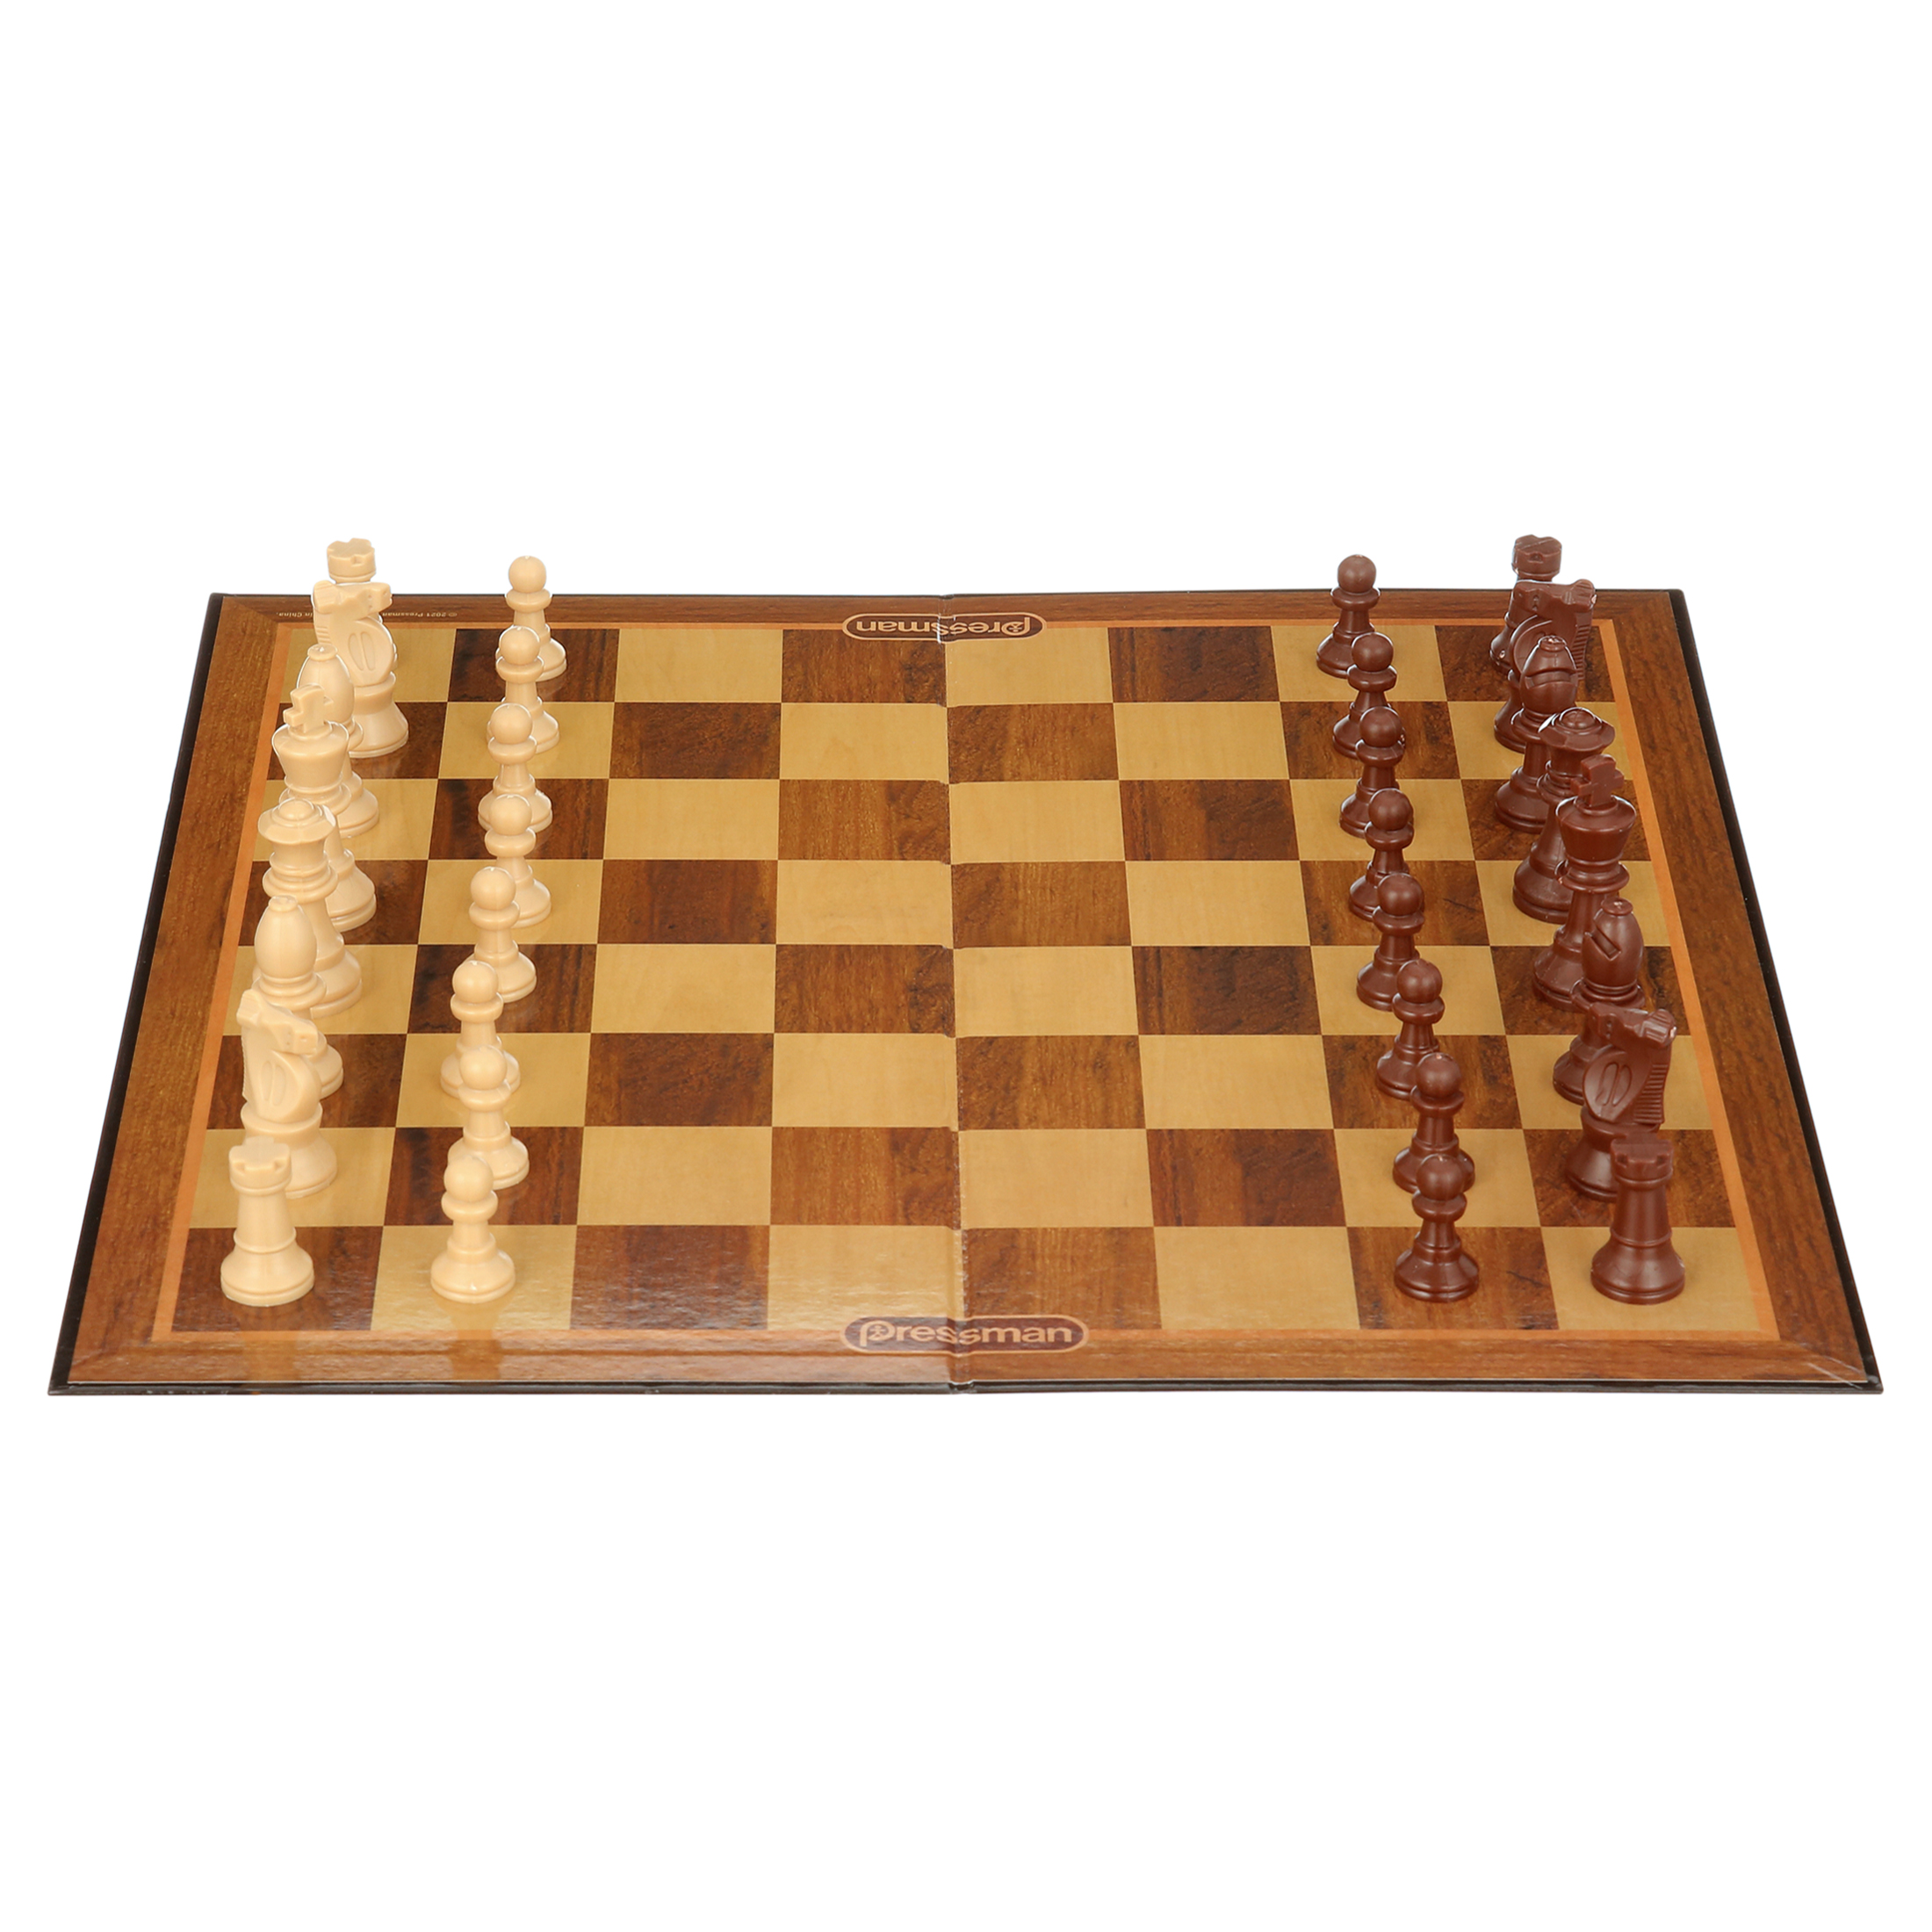 Pressman Toys - Family Classics Chess With Folding Board and Full Size Chess Pieces - image 1 of 6